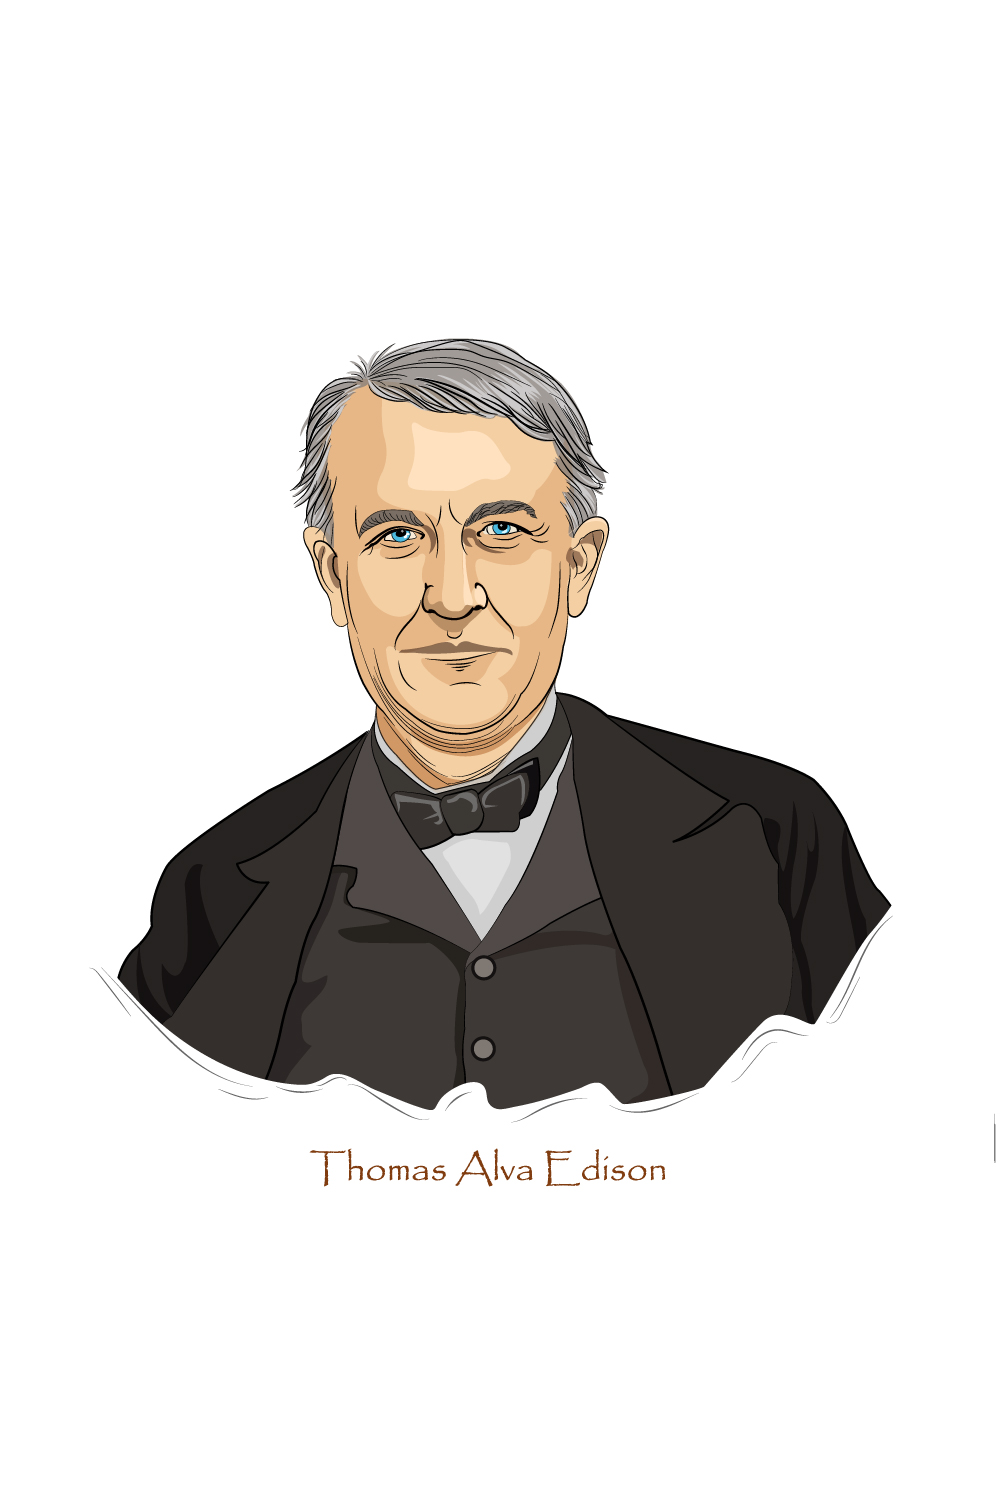 Thomas Alva Edison was an American inventor invented the phonograph, motion picture camera, and electric light bulb pinterest preview image.